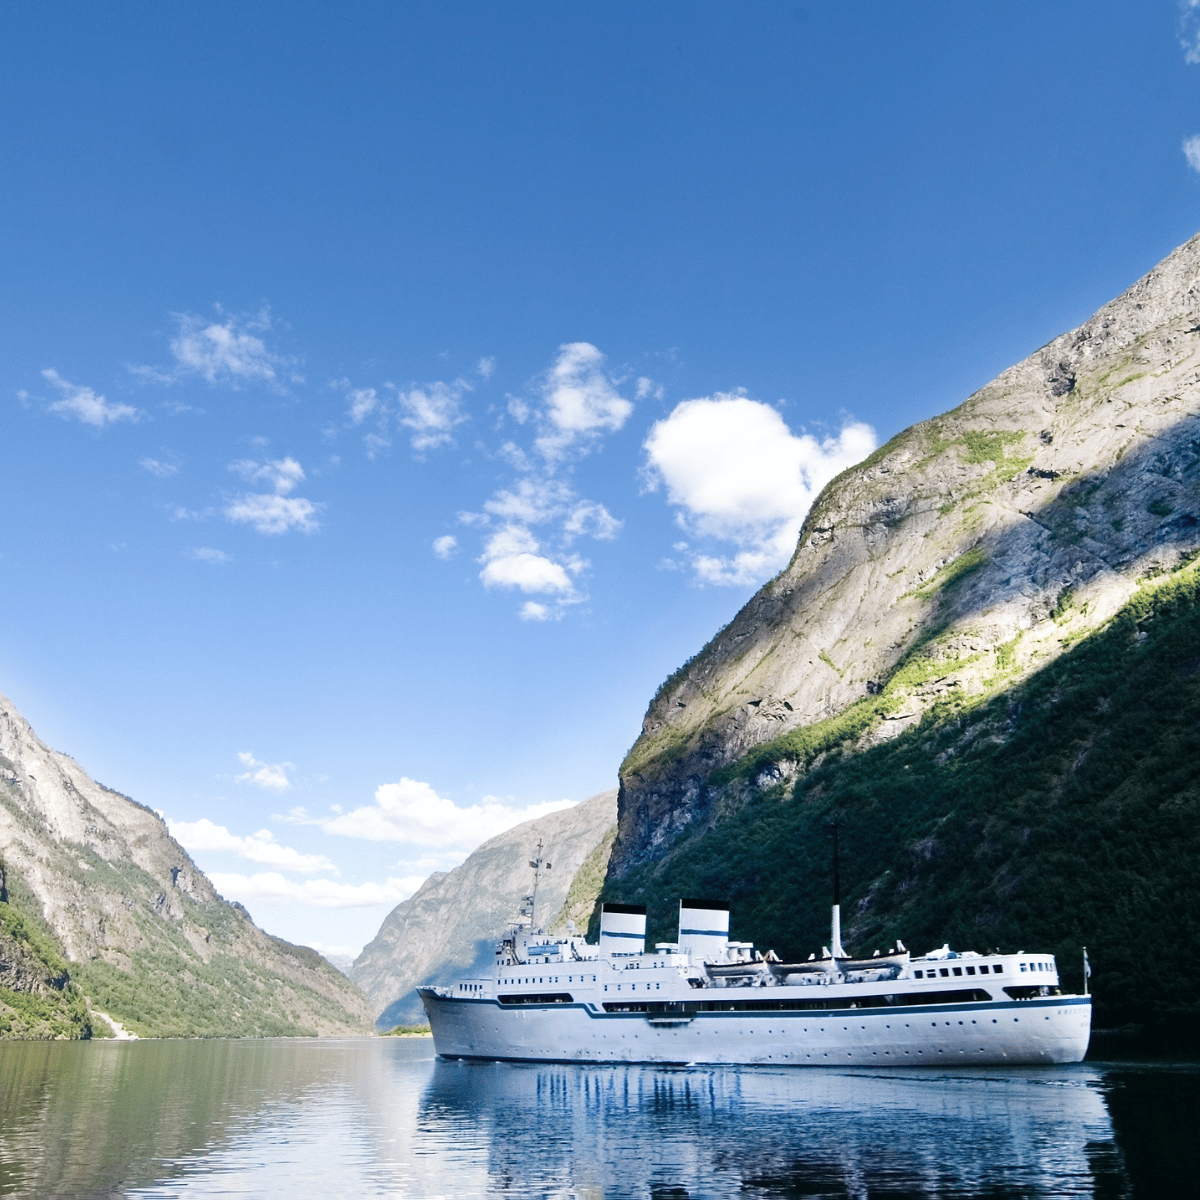 Cruise ship in Norway